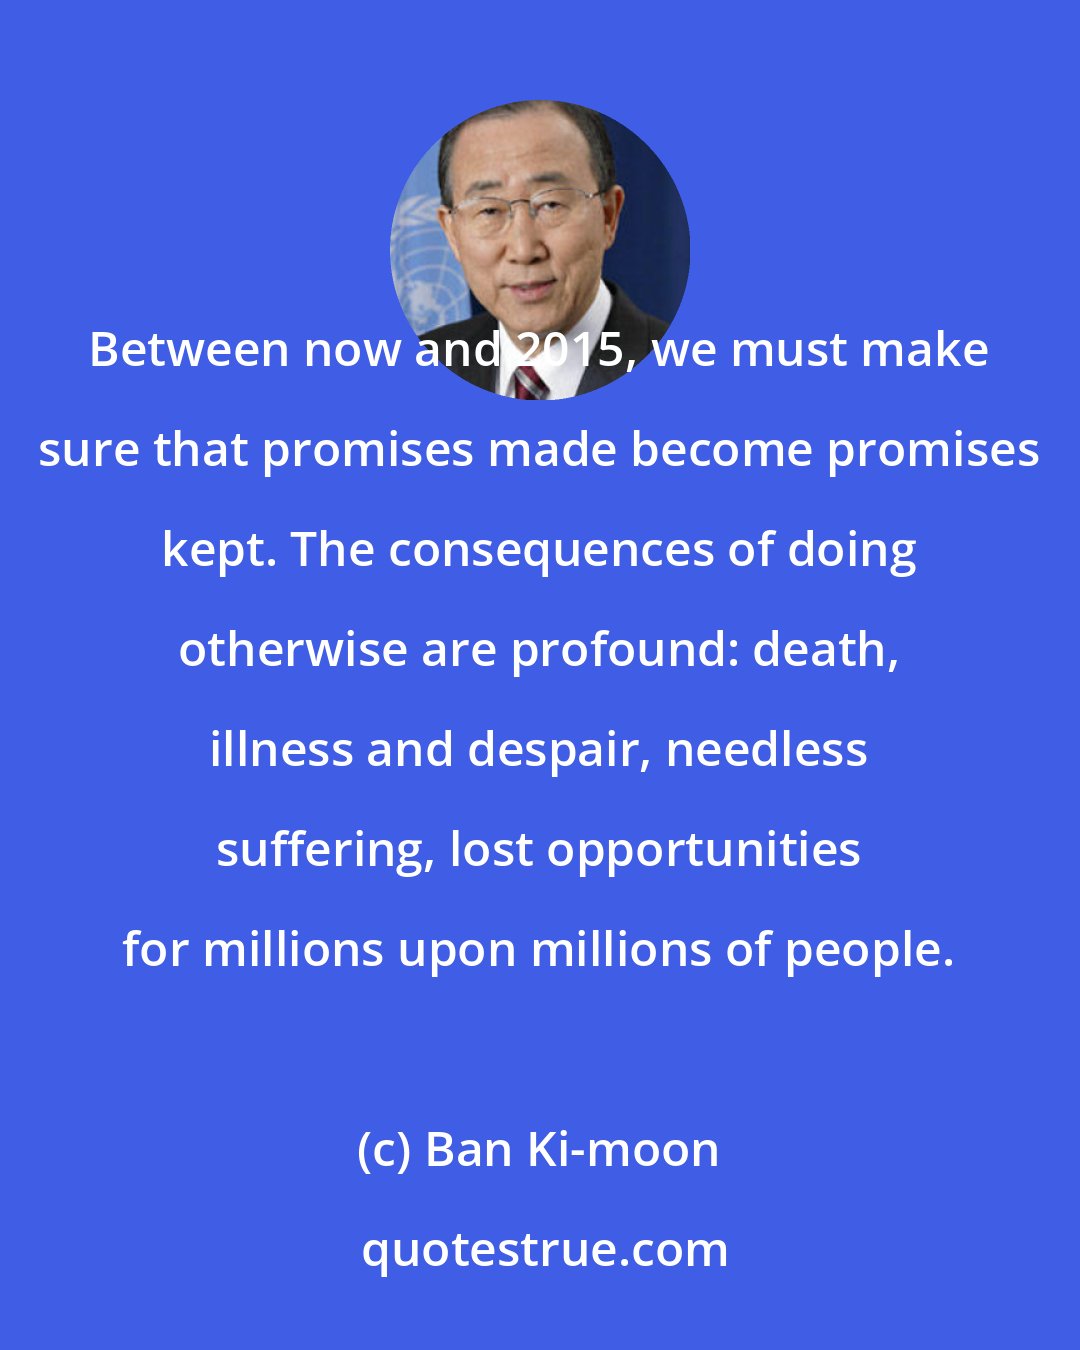 Ban Ki-moon: Between now and 2015, we must make sure that promises made become promises kept. The consequences of doing otherwise are profound: death, illness and despair, needless suffering, lost opportunities for millions upon millions of people.